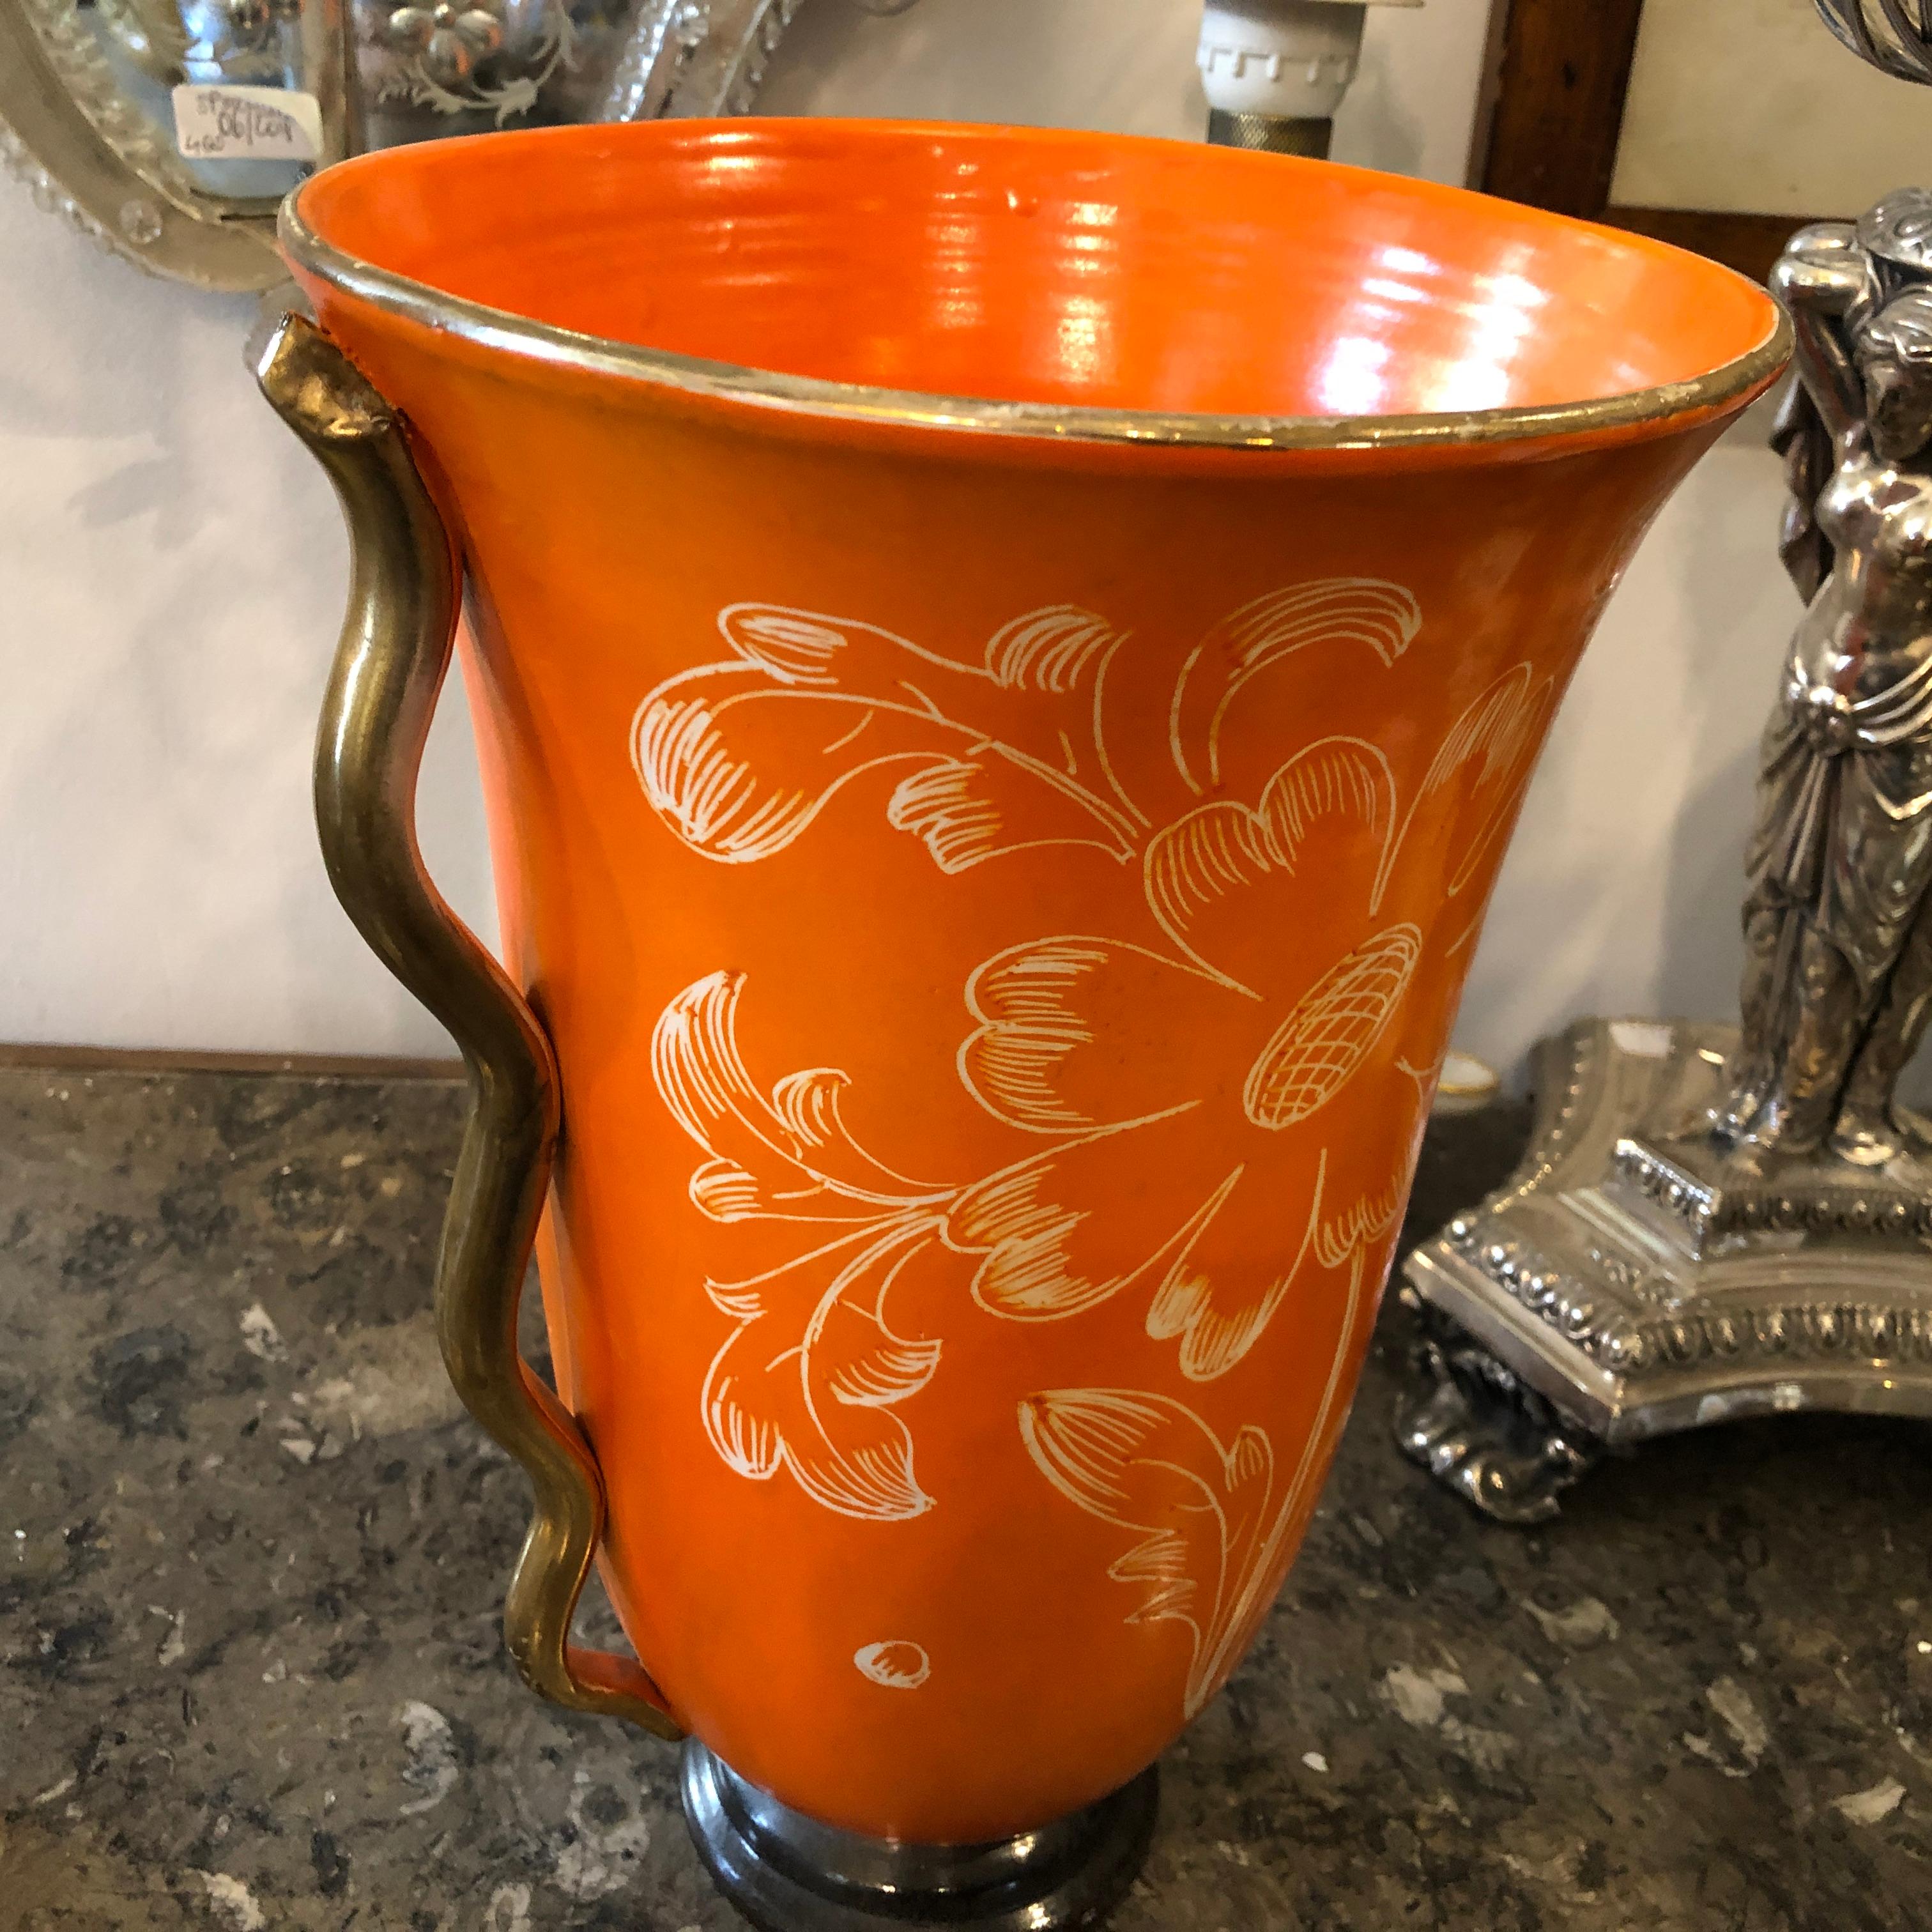 It's a rare vase made in Italy in the 1950s probably in Umbertide. Orange and gold ceramic, flowers decorated.